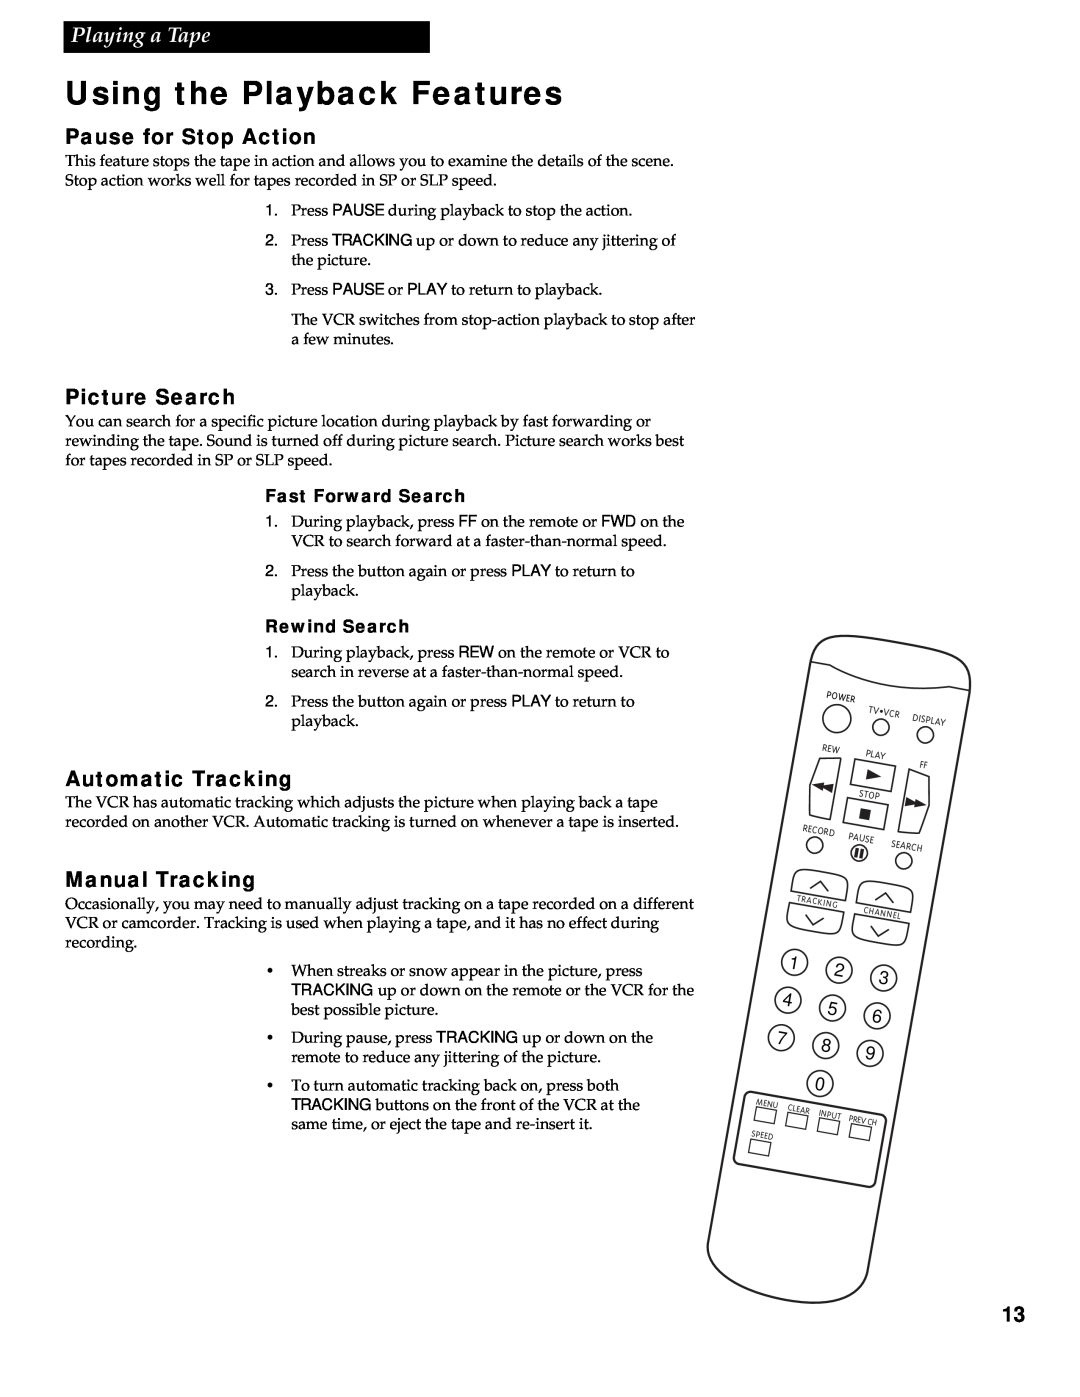 RCA VR336 manual Pause for Stop Action, Picture Search, Automatic Tracking, Manual Tracking, Using the Playback Features 